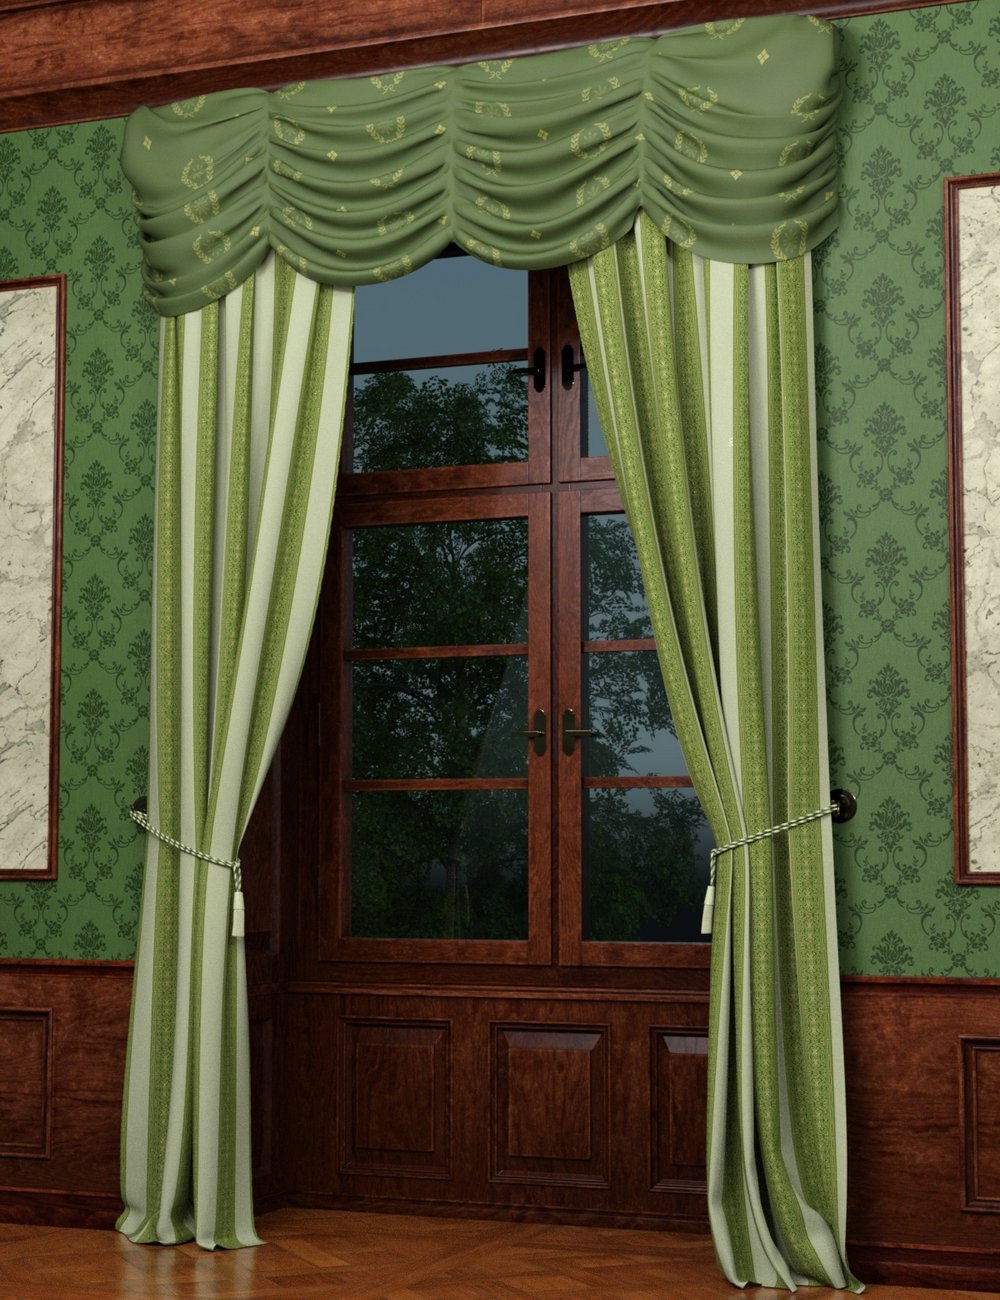 A Touch of Classicism Room by: Goriav, 3D Models by Daz 3D